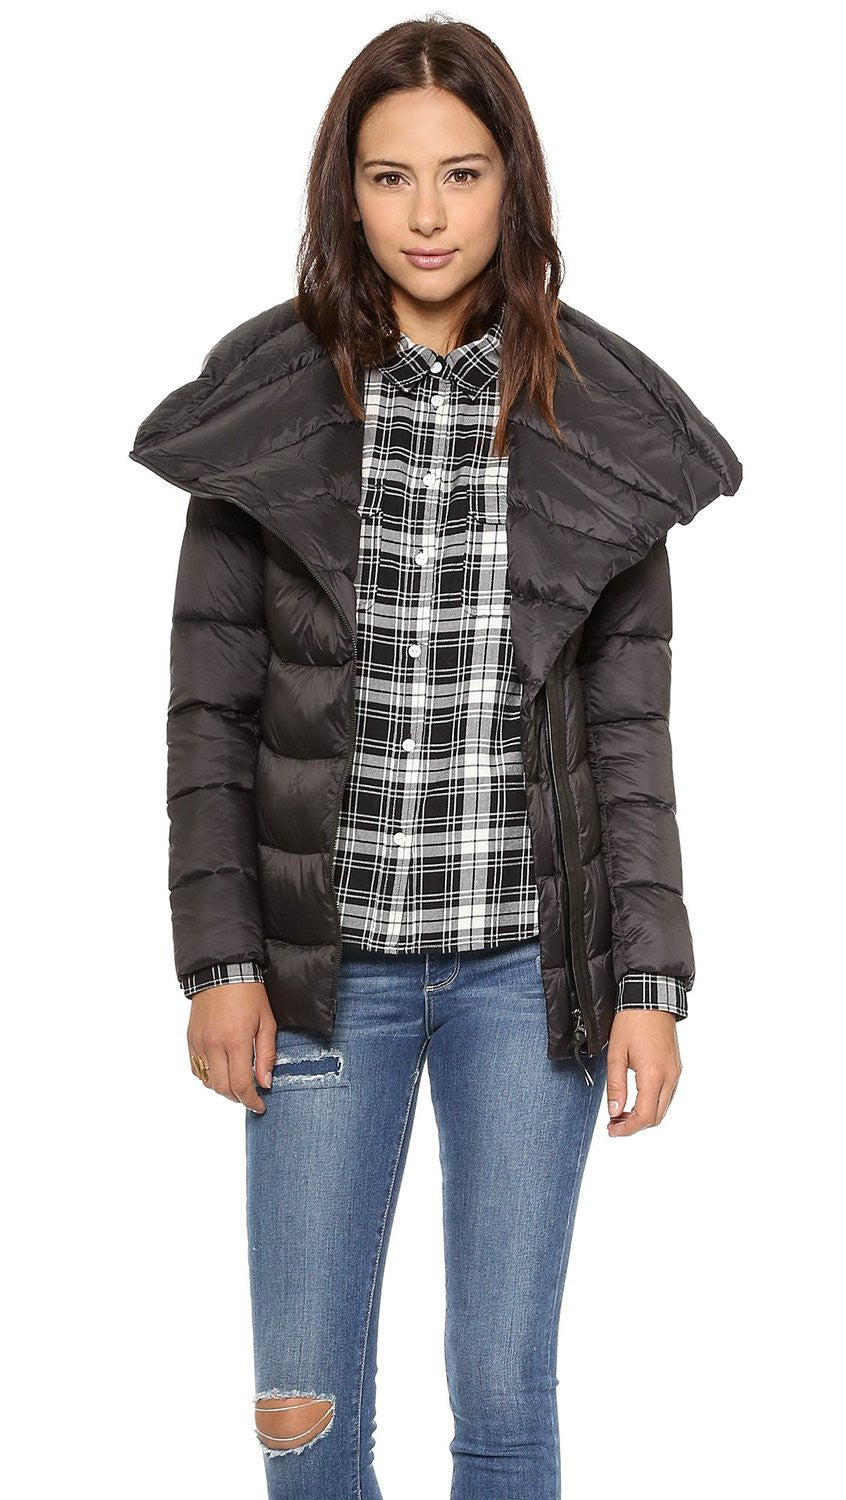 Qeren Convertible Puffer Jacket With  Leather Trim - Dejavu NYC